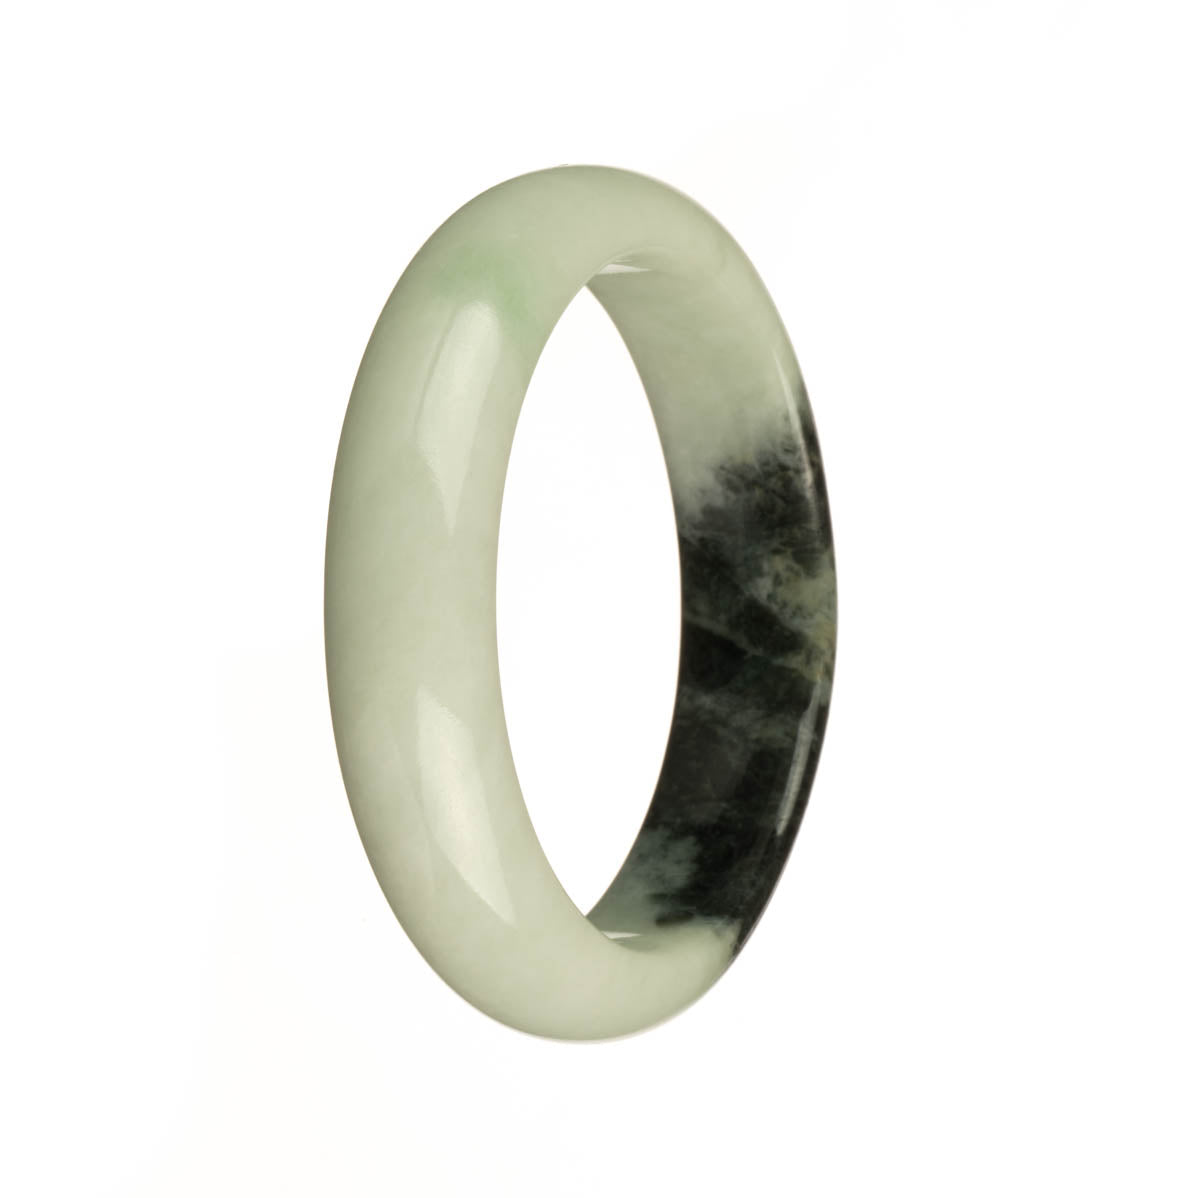 A beautiful jade bangle bracelet with a light green color and dark green patterns, featuring a striking apple green patch. The bracelet is made from genuine Grade A Burma jade and has a unique half moon shape. A stunning piece from MAYS GEMS.